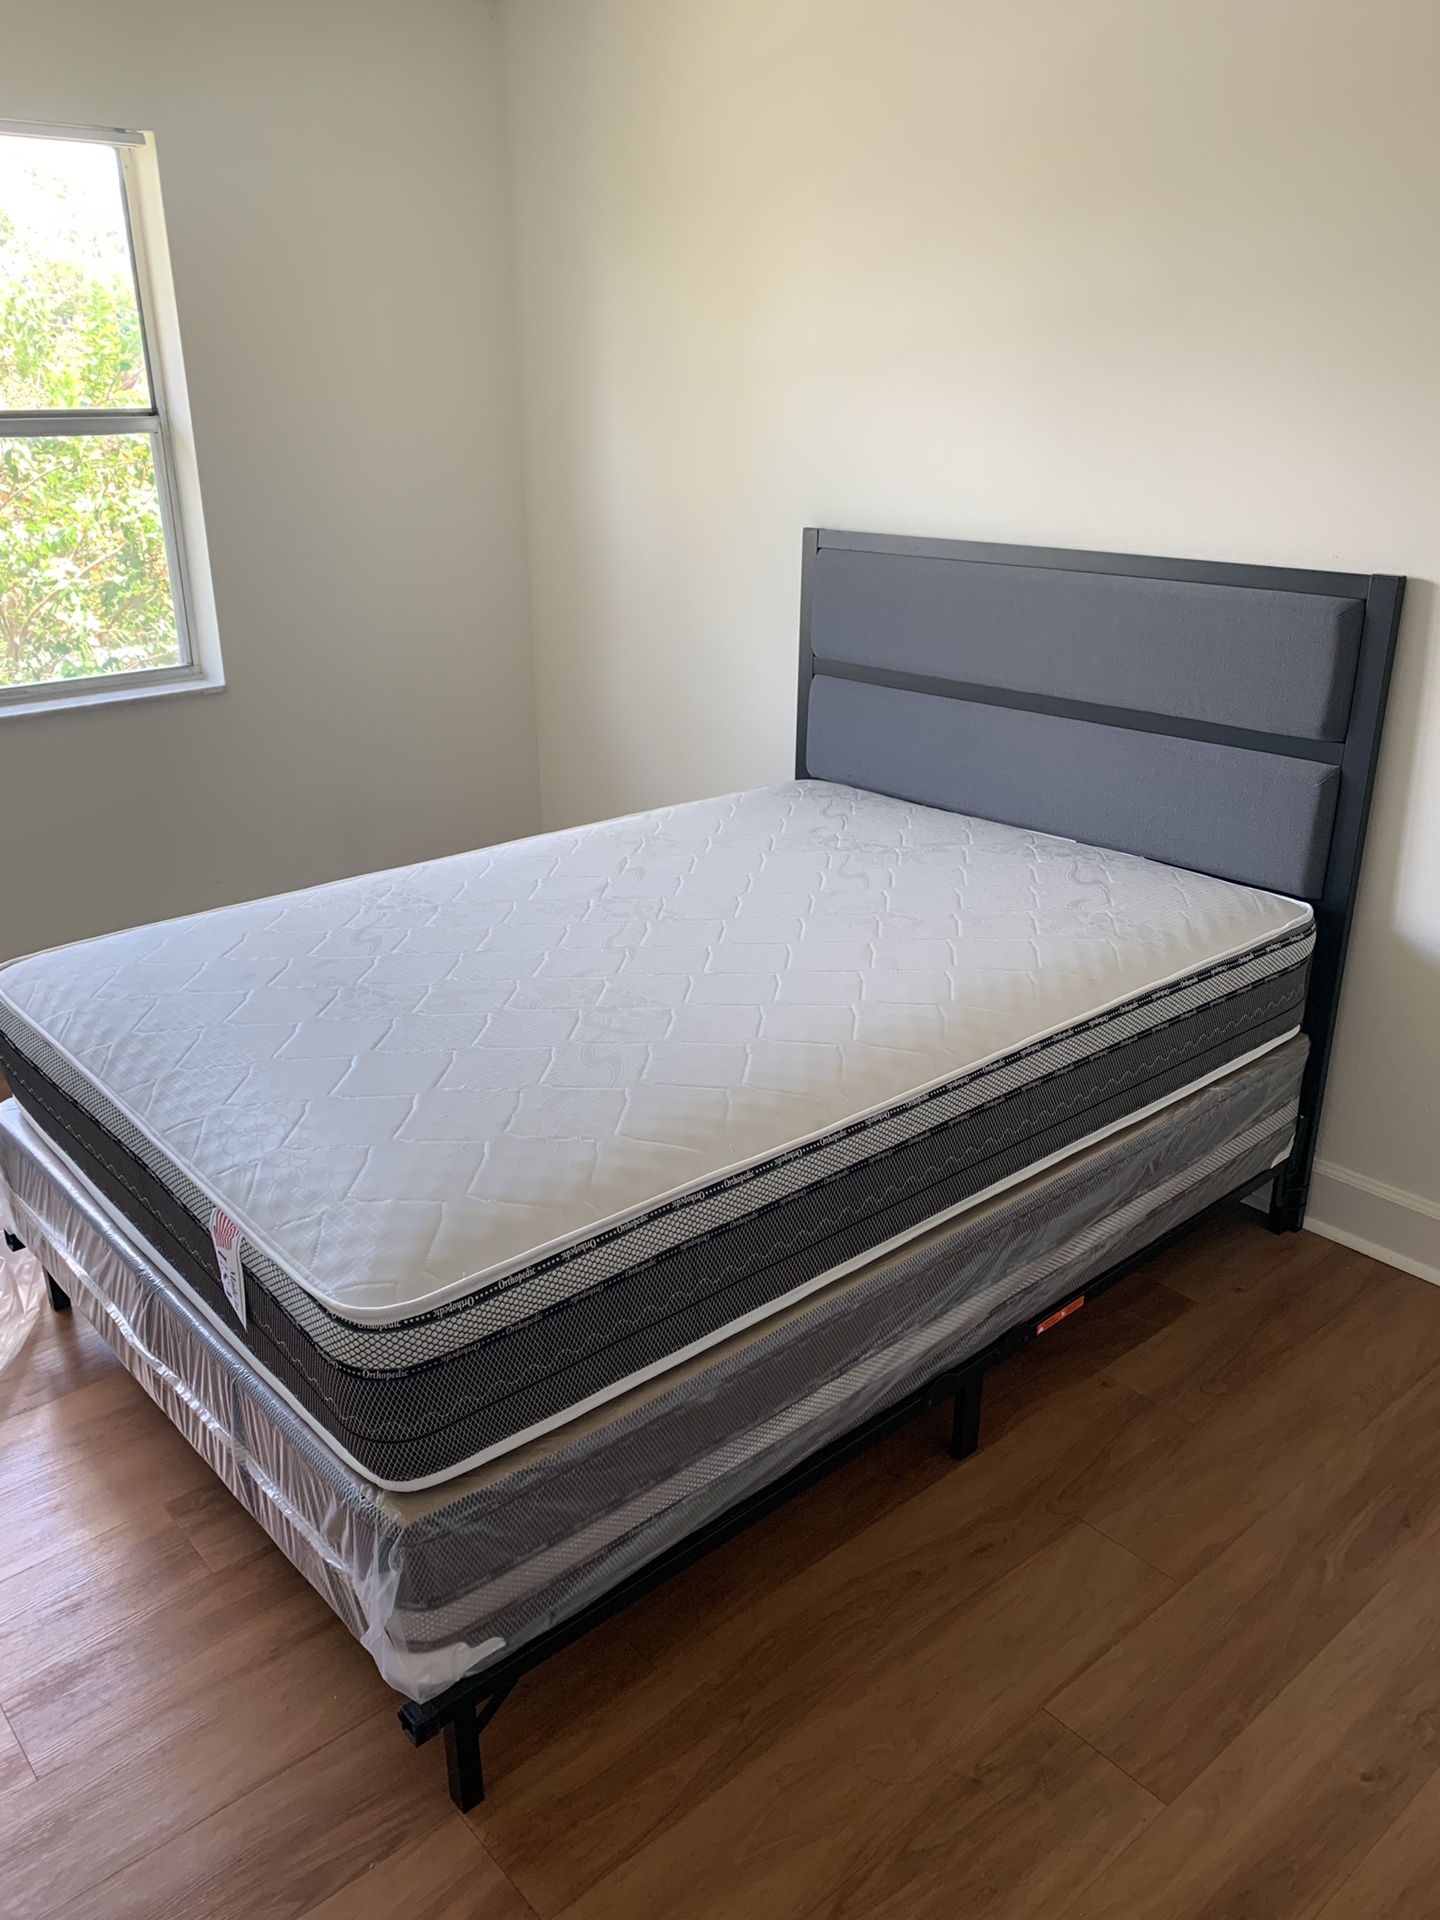 Brand new gray and bald bed frame FREE DELIVERY and with mattresses and box springs TWIN SIZE 220$ full size 255$ queen 269